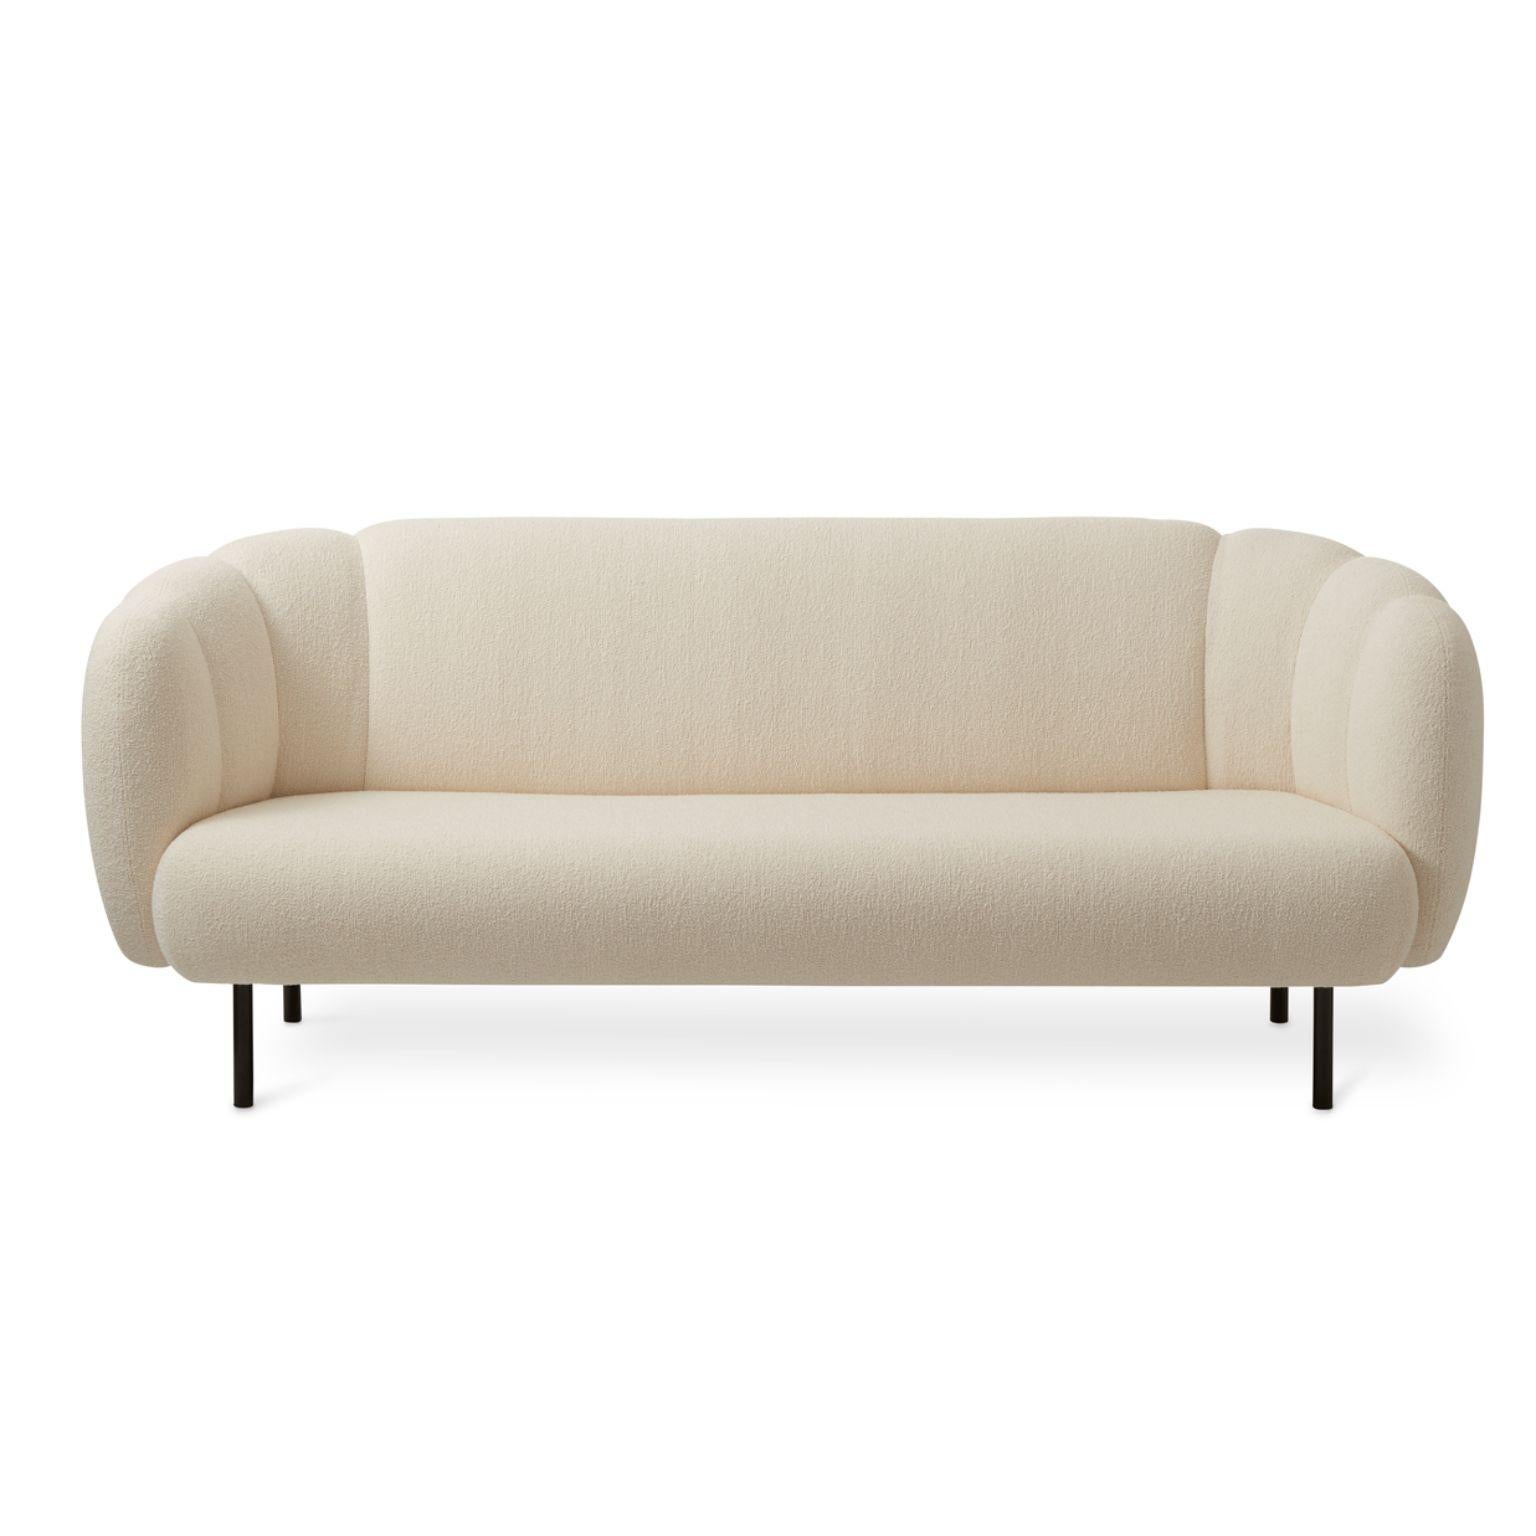 Caper 3 seater with stitches cream by Warm Nordic.
Dimensions: D200 x W84 x H 80 cm.
Material: textile upholstery, wooden frame, powder coated black steel legs.
Weight: 55.5 kg
Also available in different colours and finishes. 

An elegant